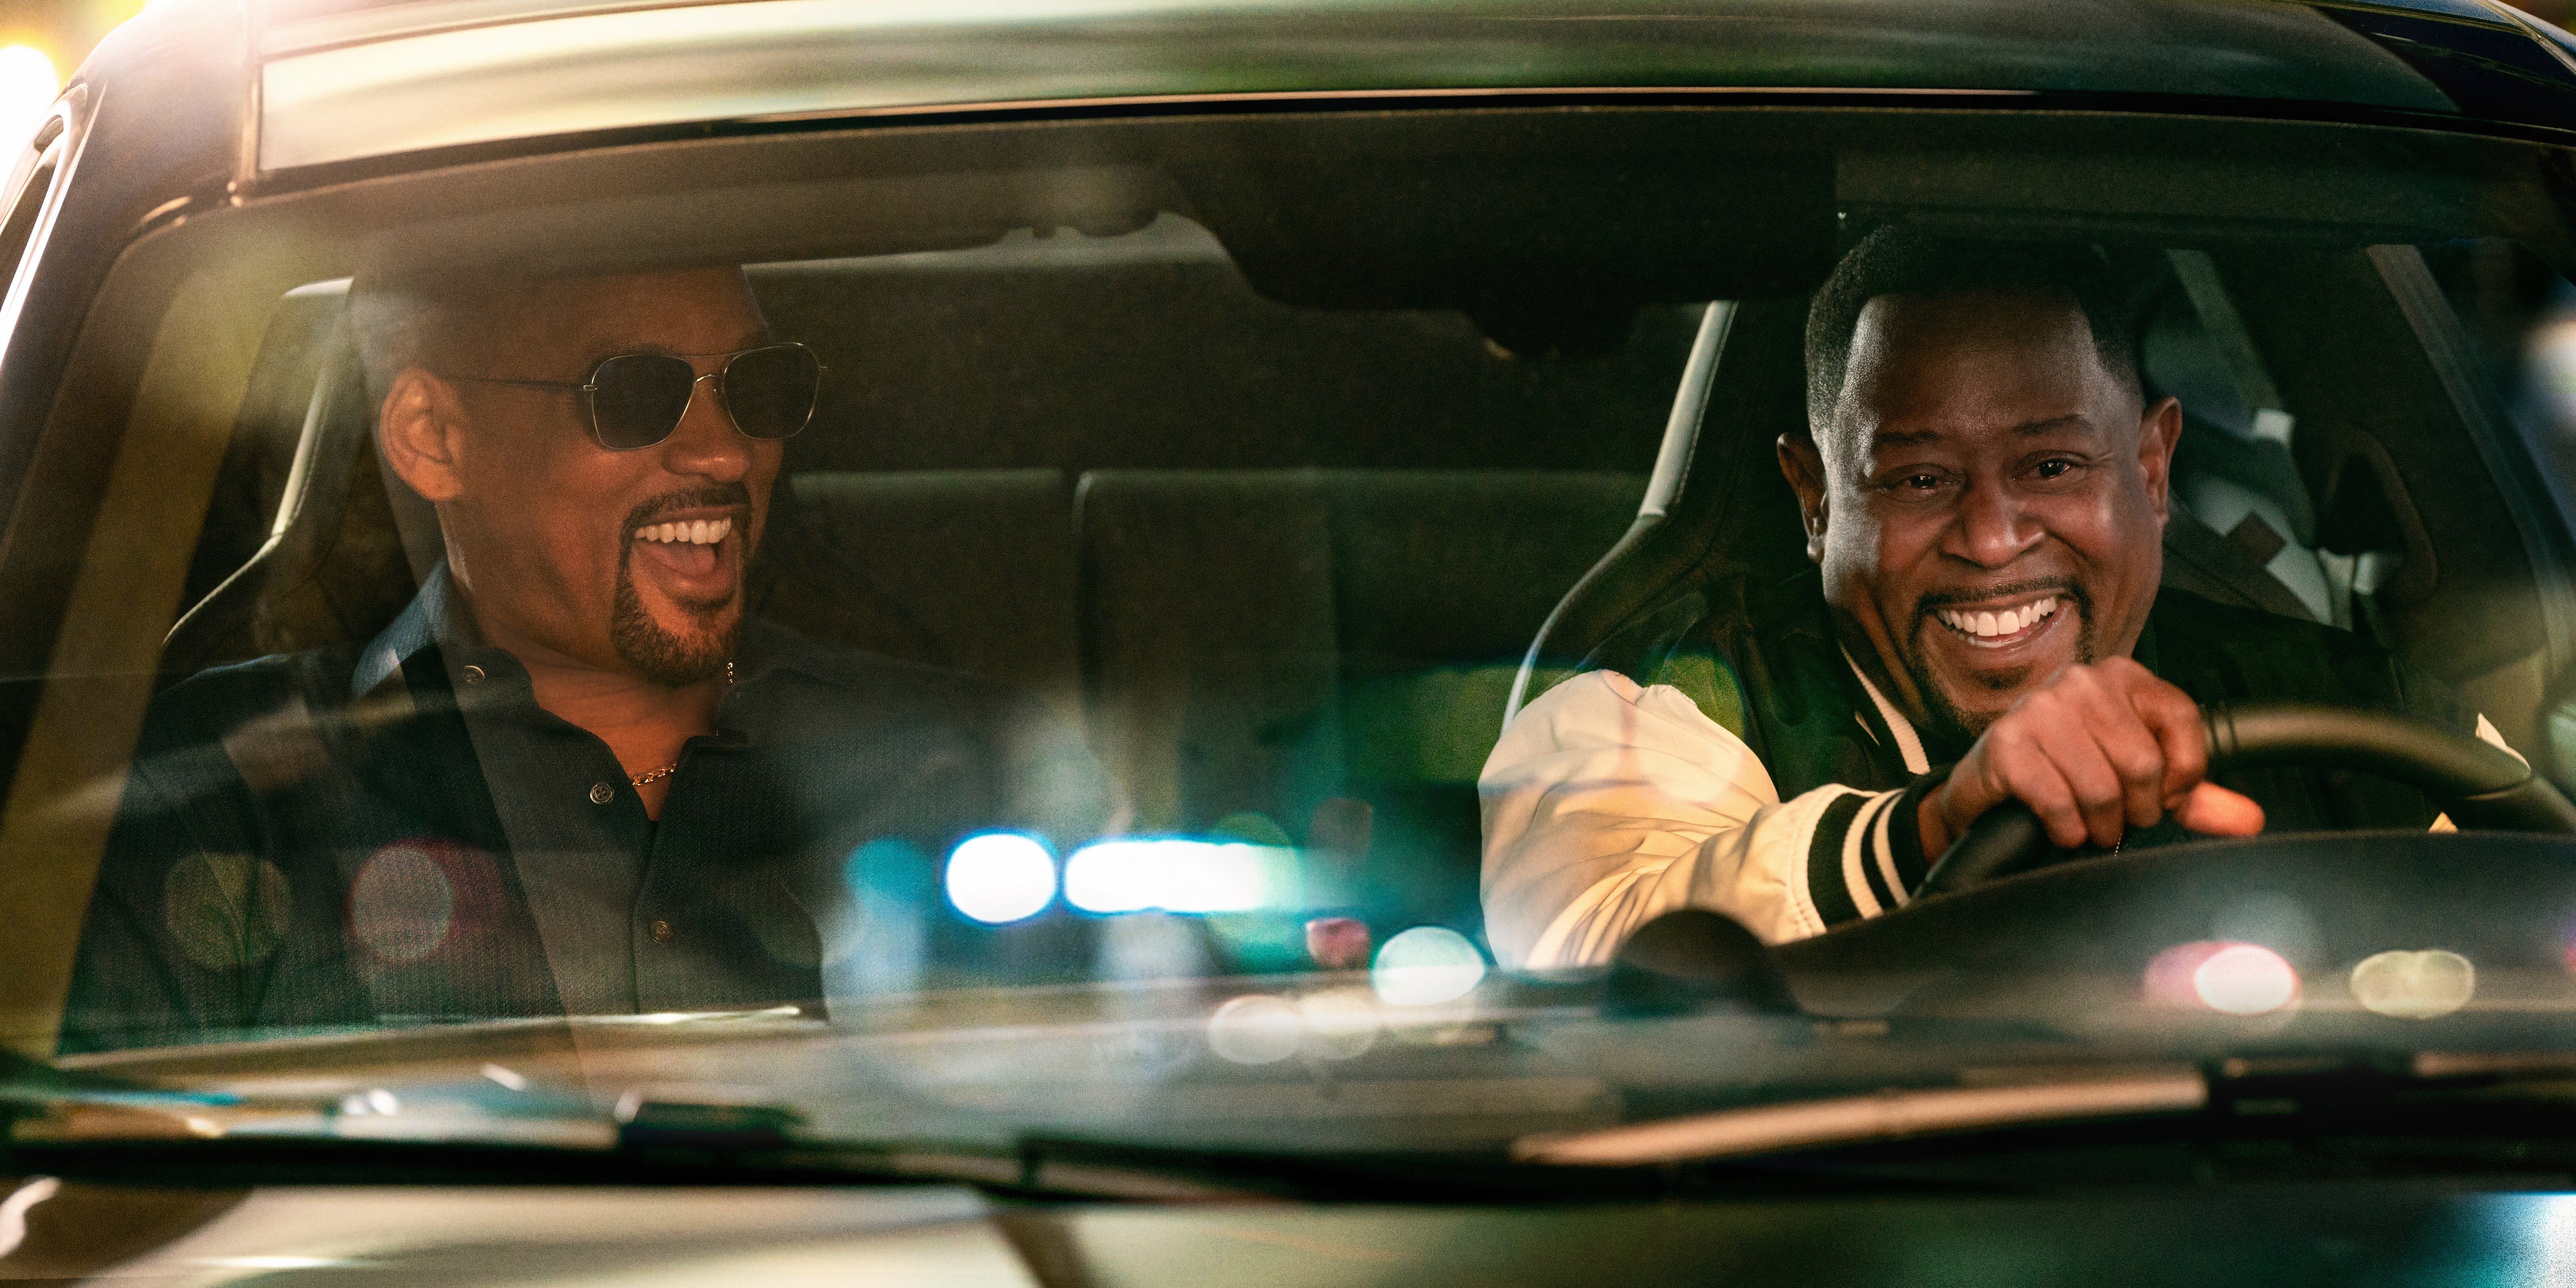 Will Smith and Martin Lawrence laugh together in a car in Bad Boys Ride or Die still